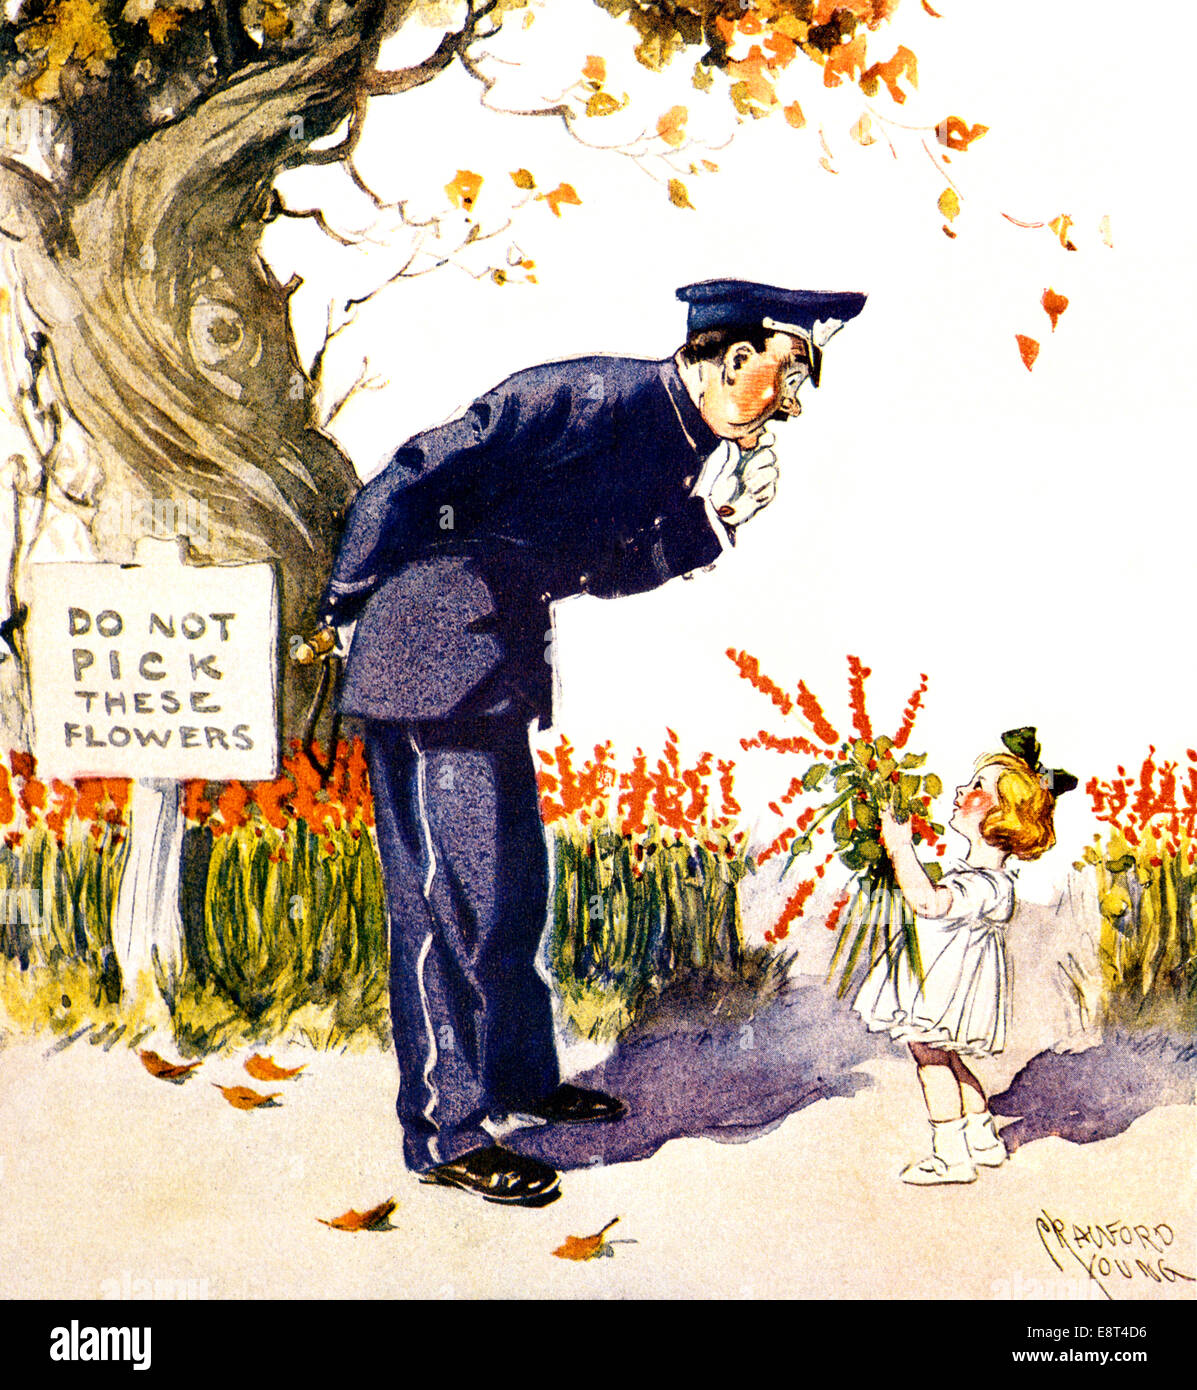 1900s 1910s LITTLE GIRL HANDING BOUQUET TO POLICEMAN BY DO NOT PICK FLOWERS SIGN Stock Photo